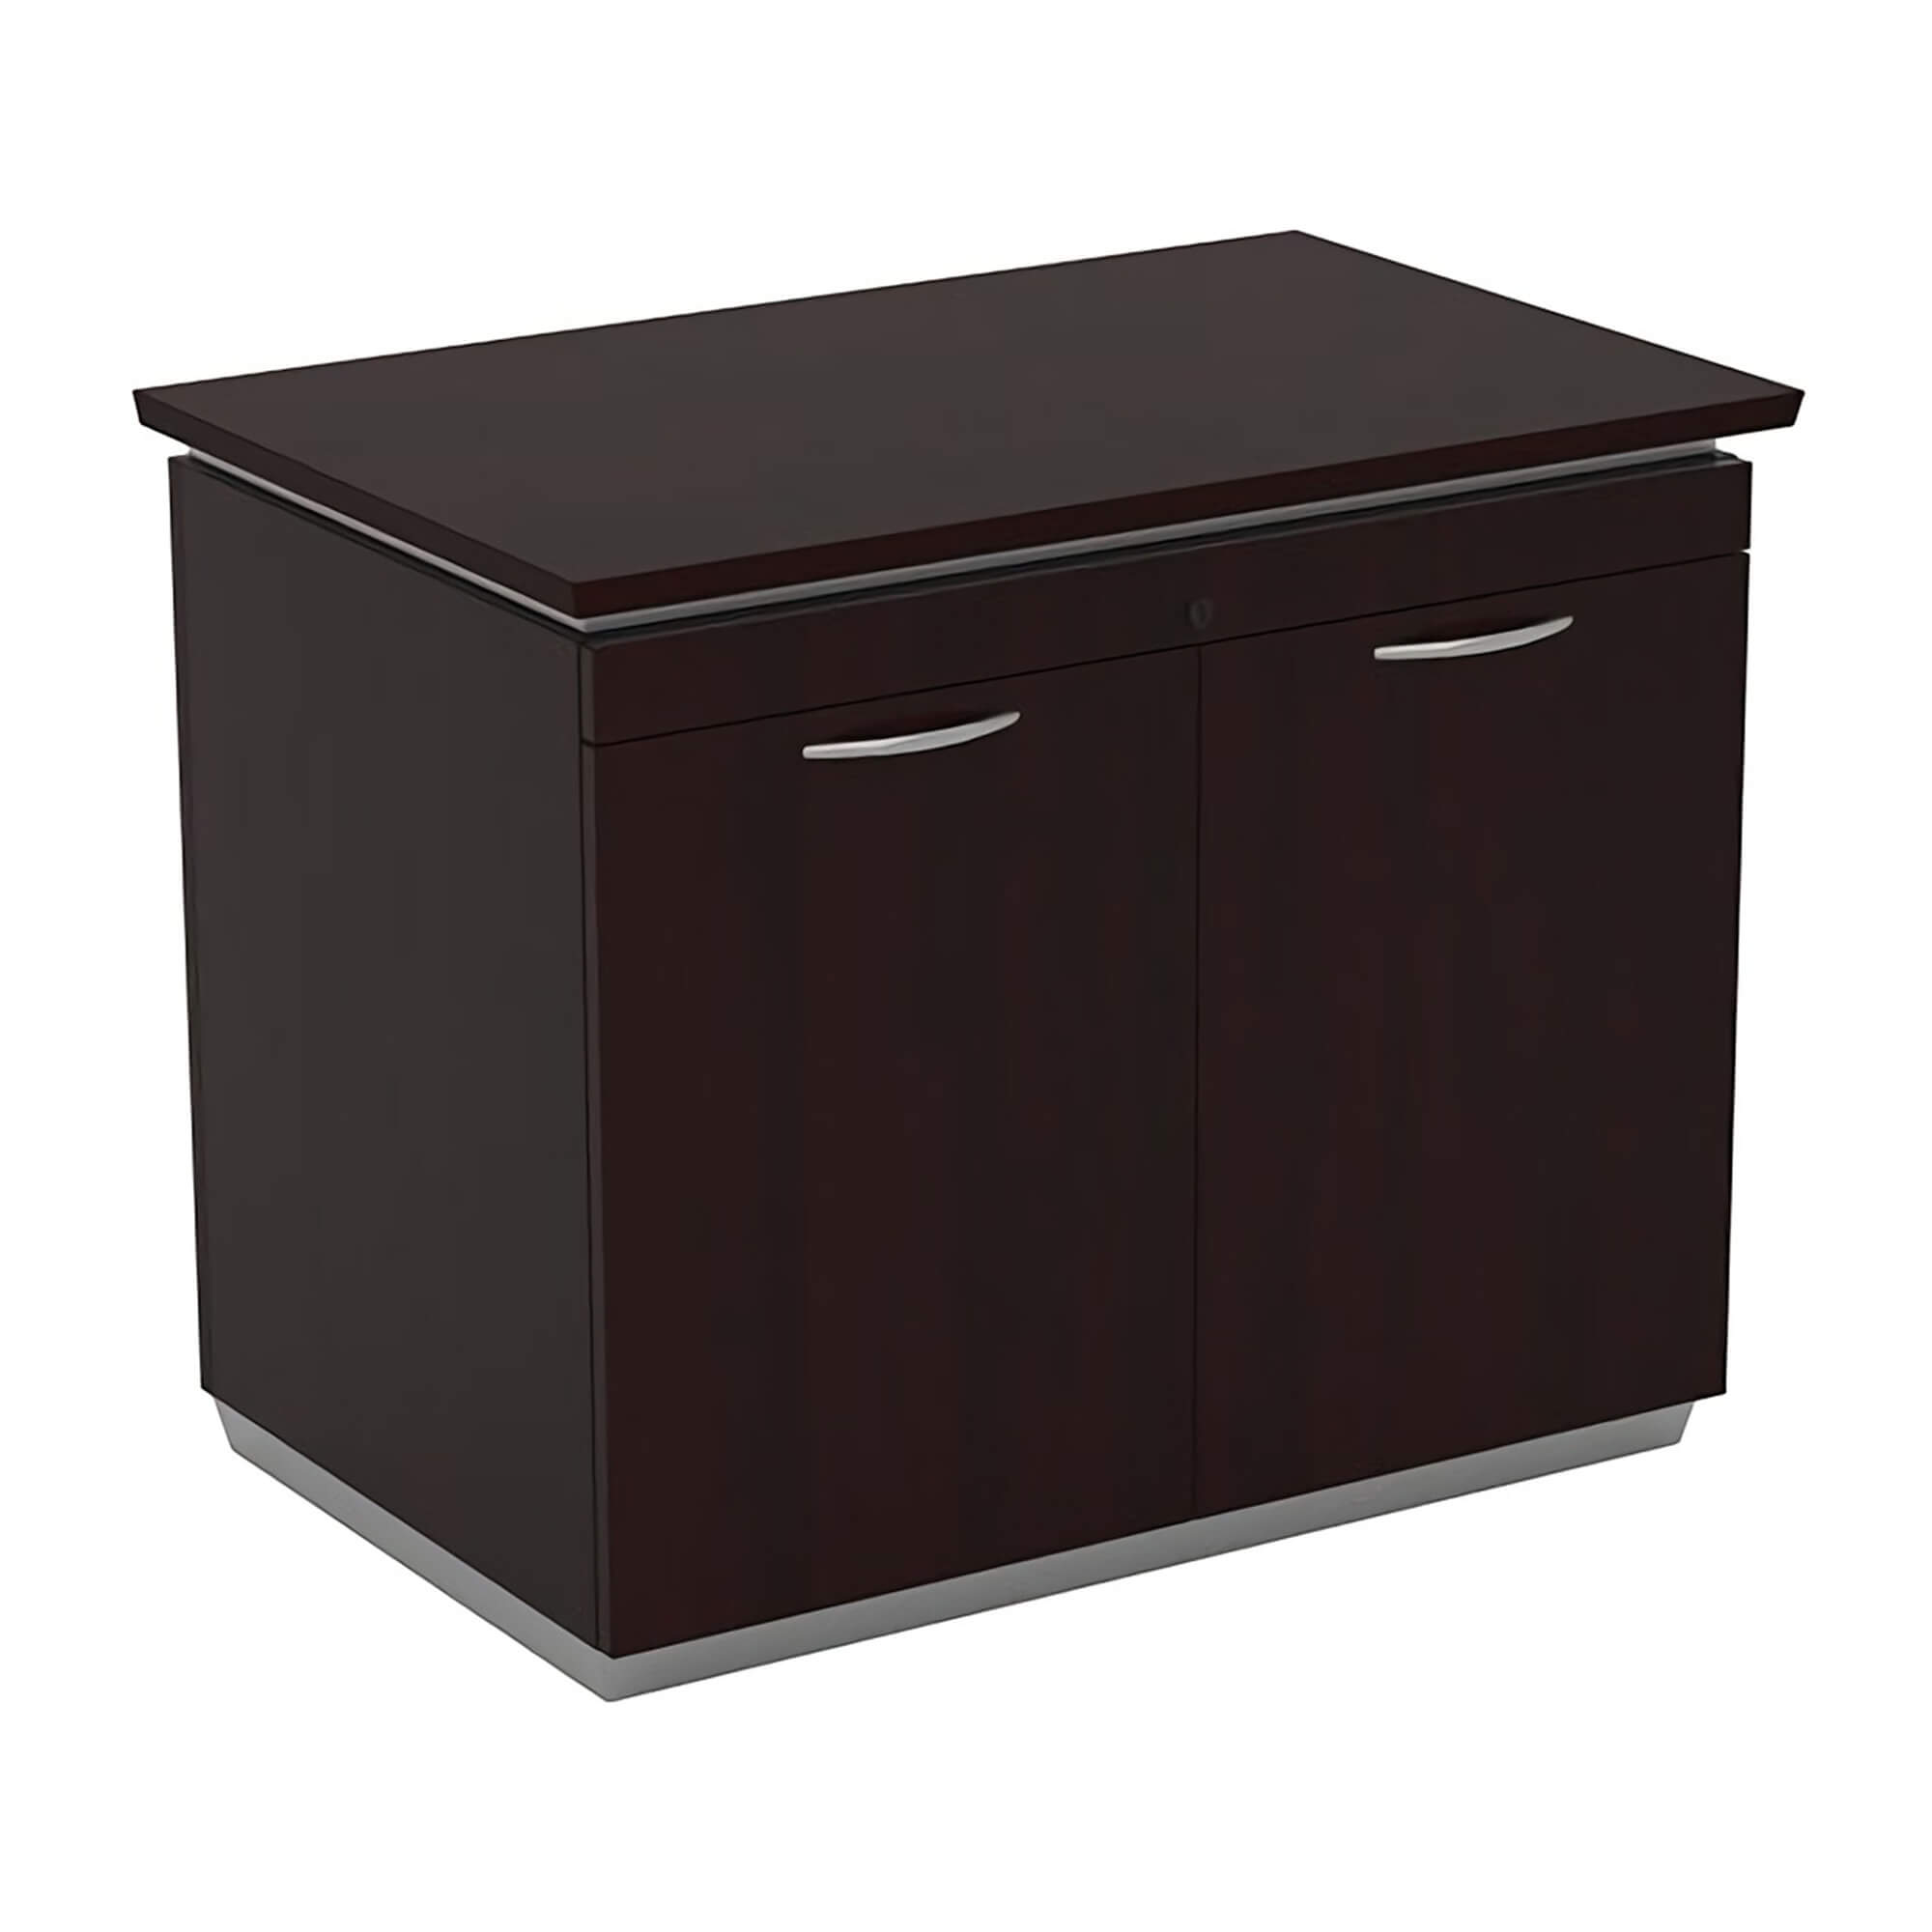 Conference room storage and accessories CUB TUXDKR 13 PSO